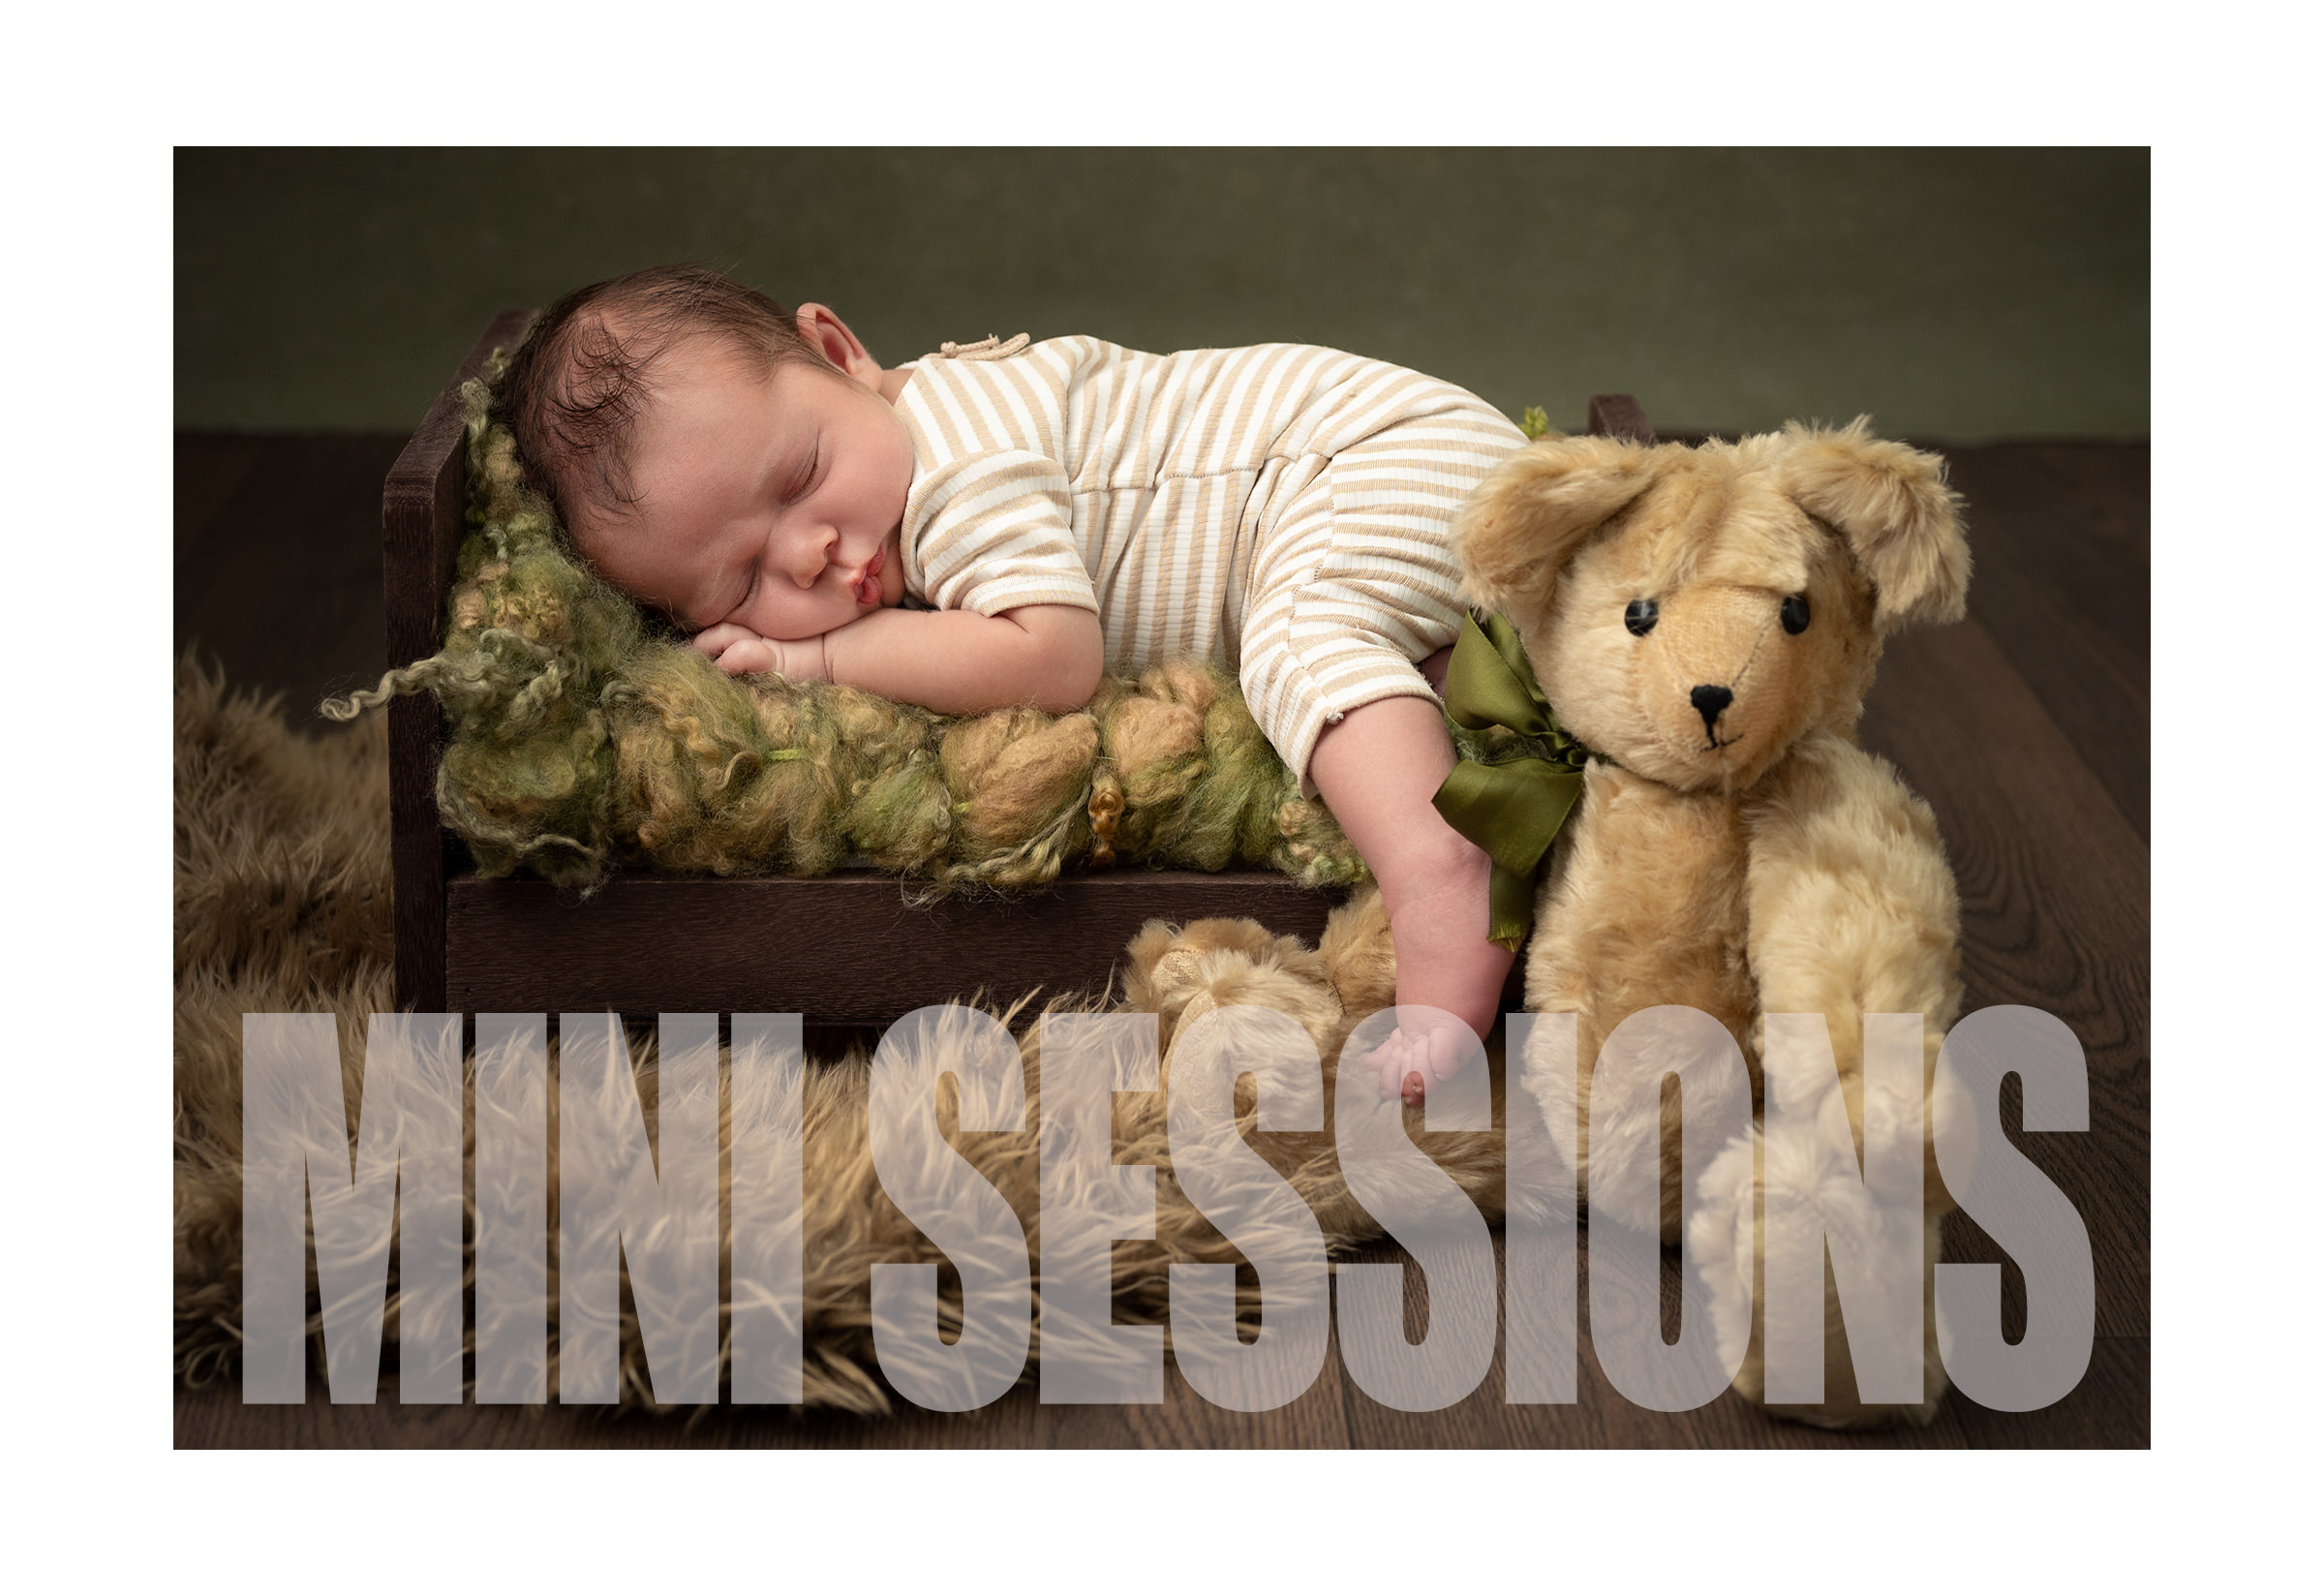 Newborn Mini Sessions in Leeds Budget package offer